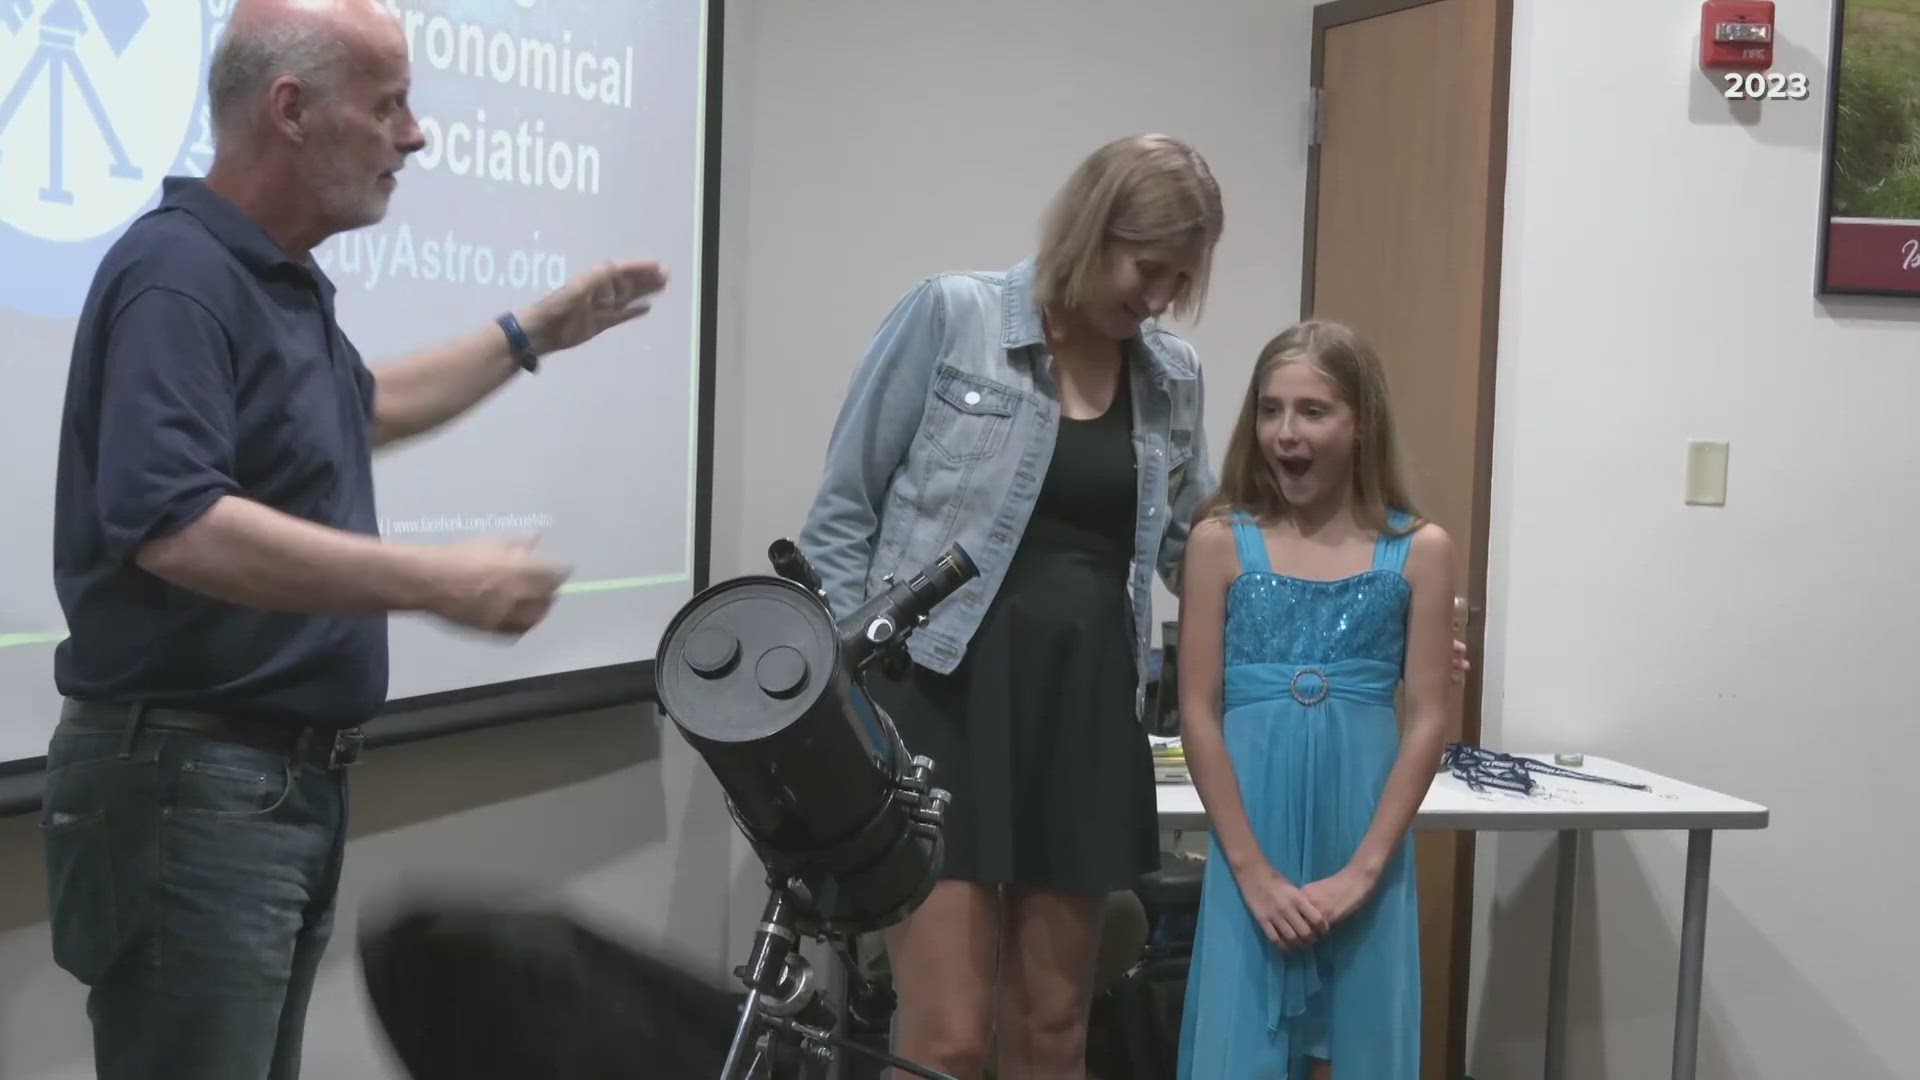 11-year-old astrology enthusiast Joy Conley gives tips on how to view the total solar eclipse safely.